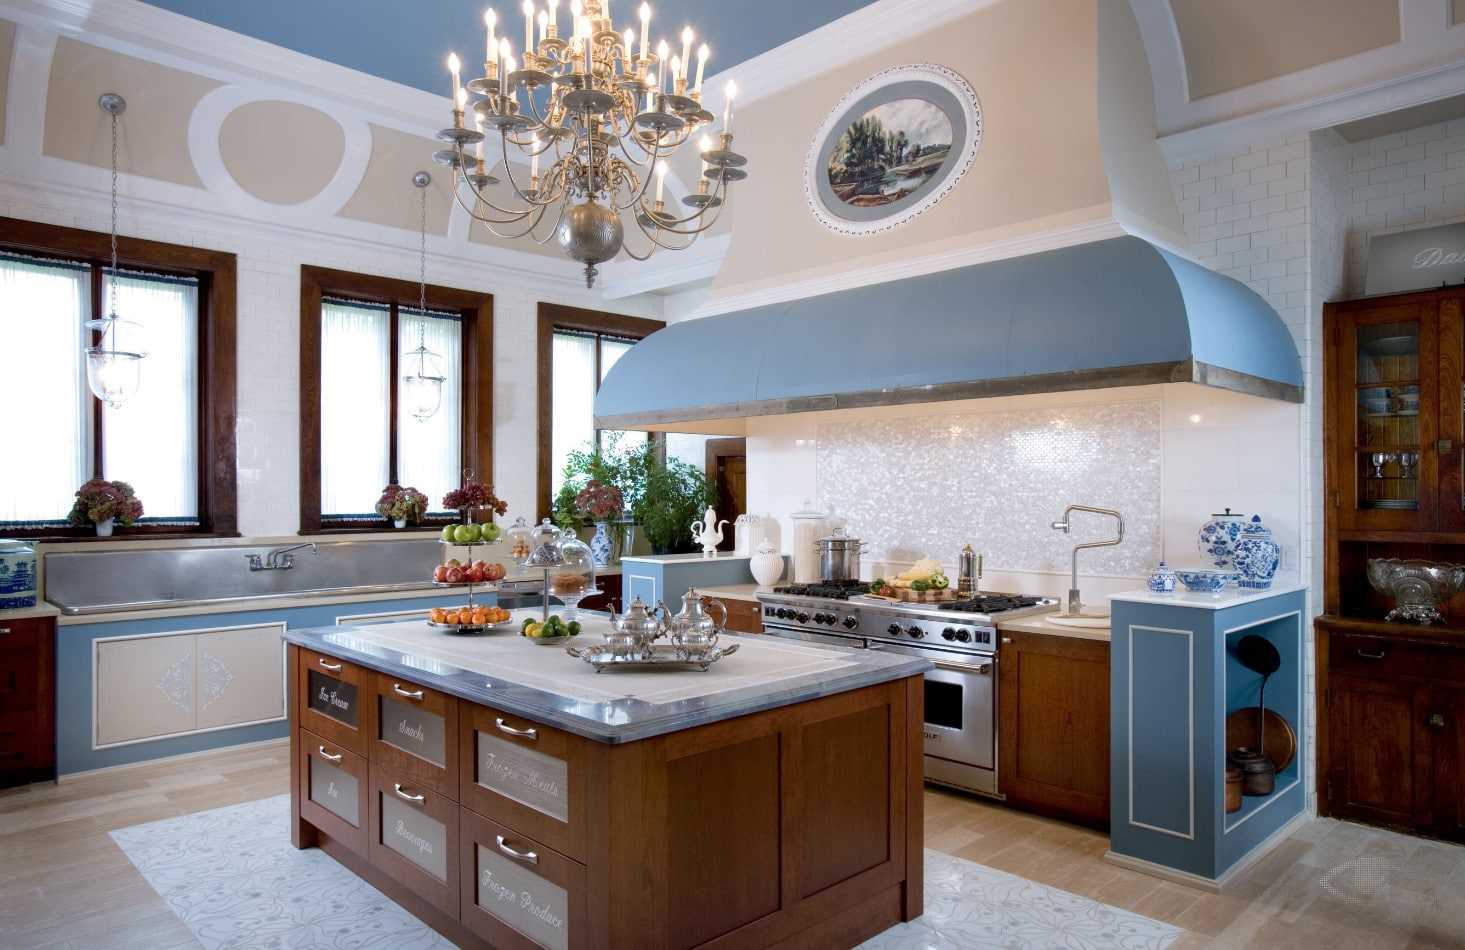 variant of the unusual style of a large kitchen